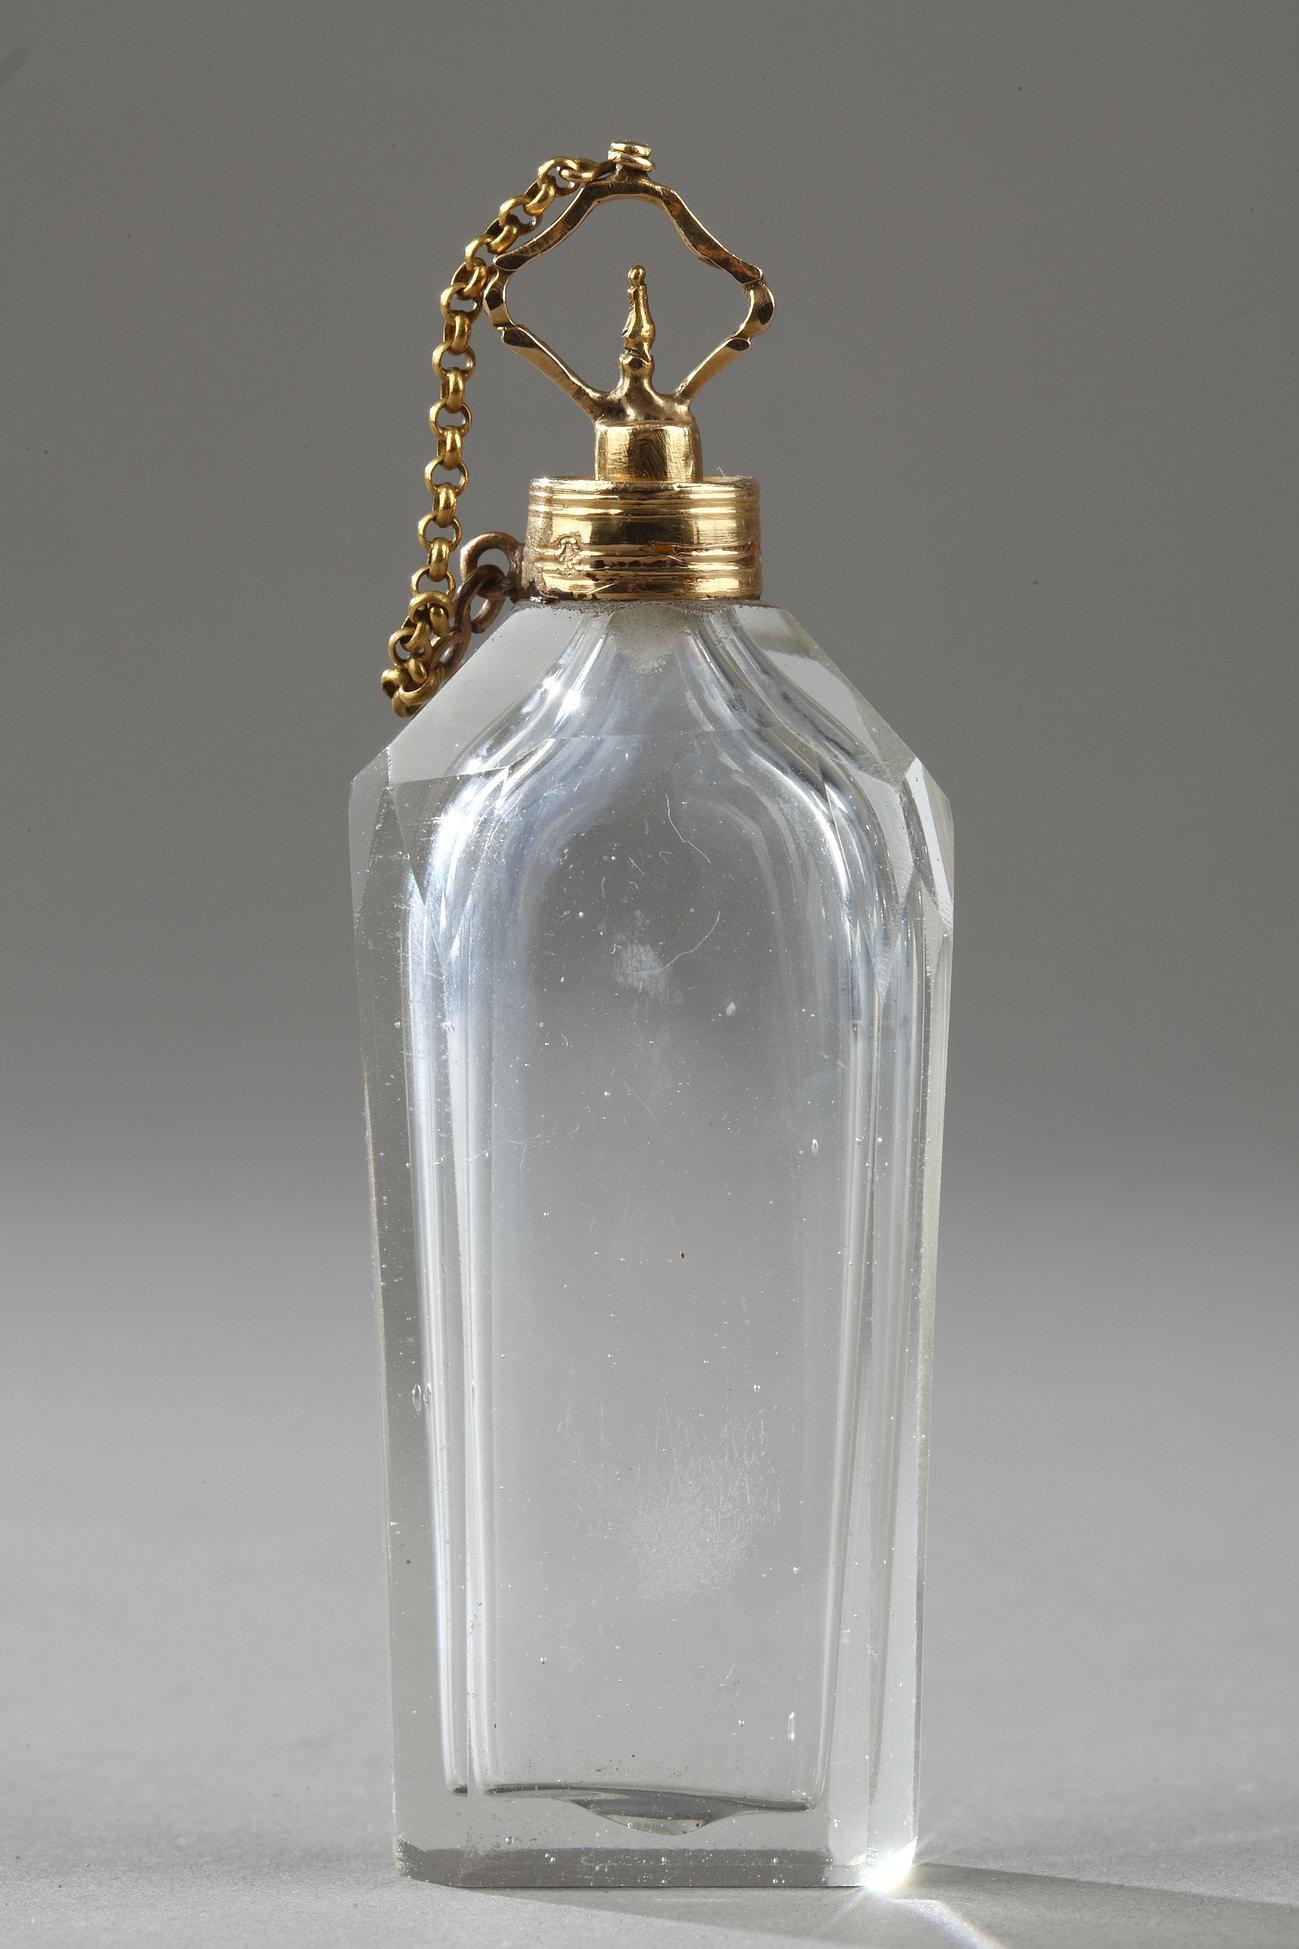 Crystal bottle blown and cut, 18-carat gold setting.A band of gold encircles the neck and base of the flask, and the openwork, gold stopper is connected to the neck with a thin, gold chain.

Gold mark of recense end of 18th century.

Louis XVI